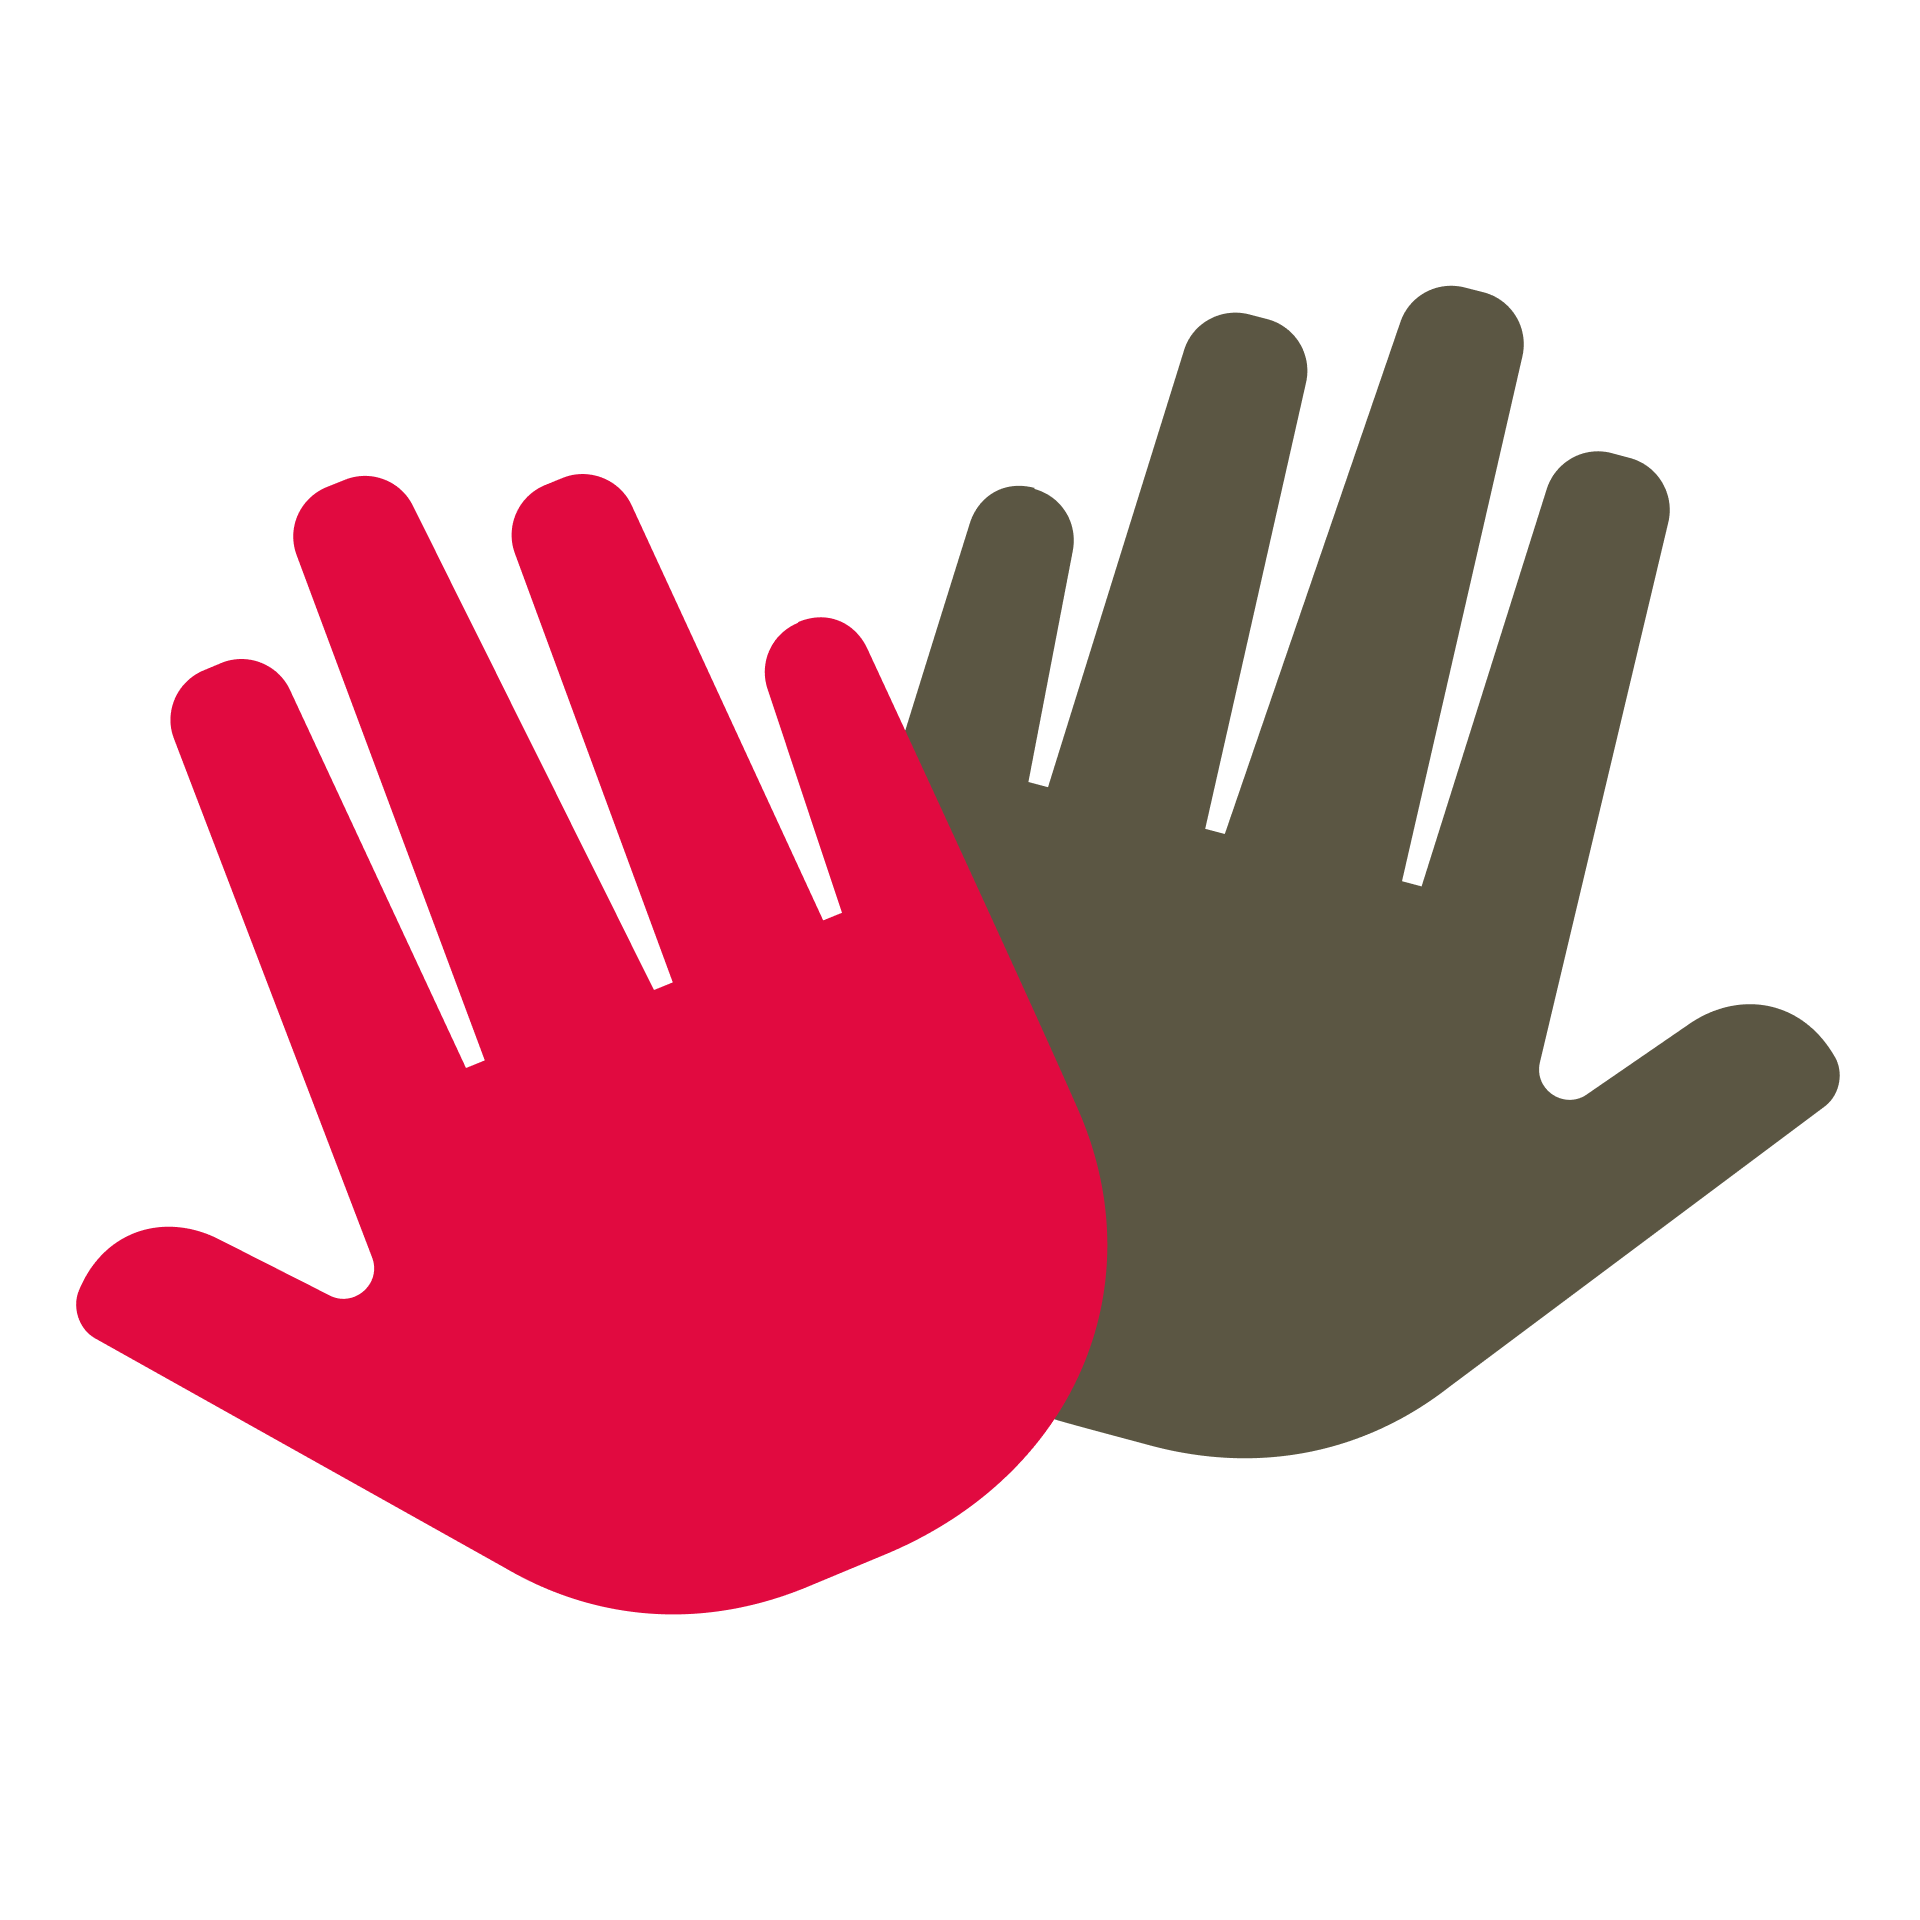 Icon of two hands giving a high-five